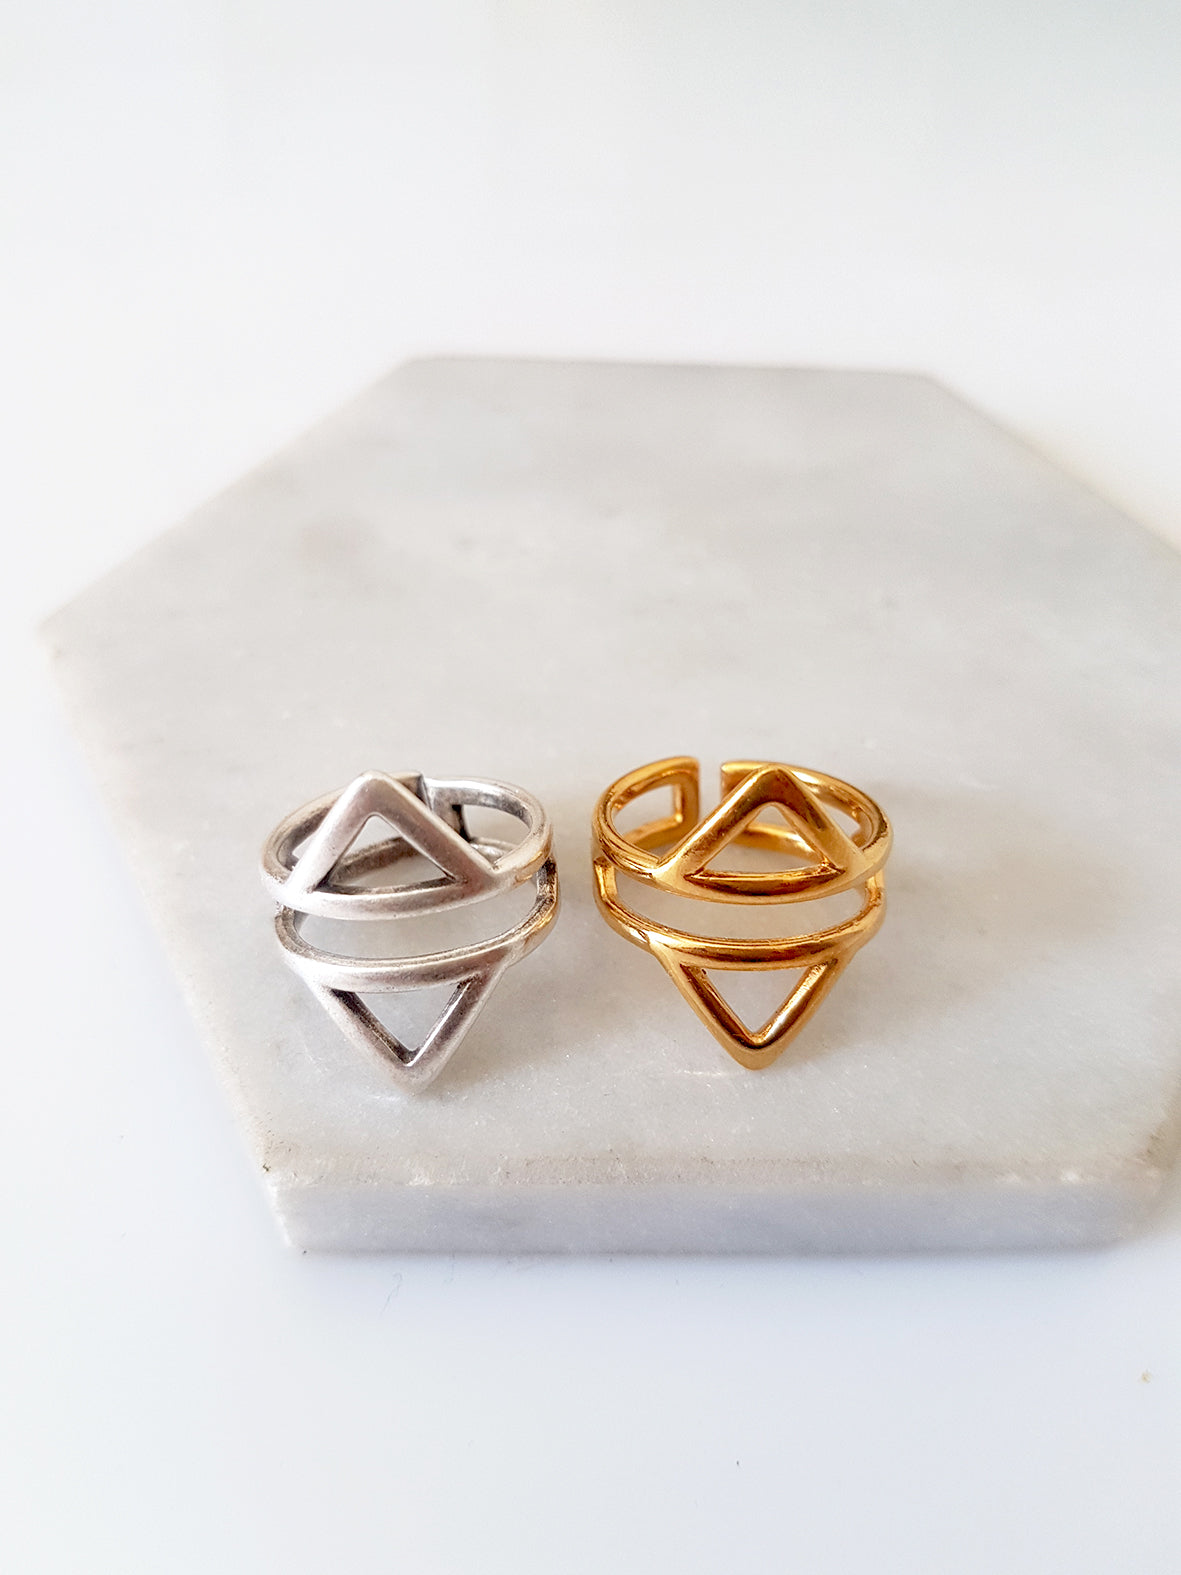 Rhombus chevalier ring in a package of 5 pieces - SoCuteb2b